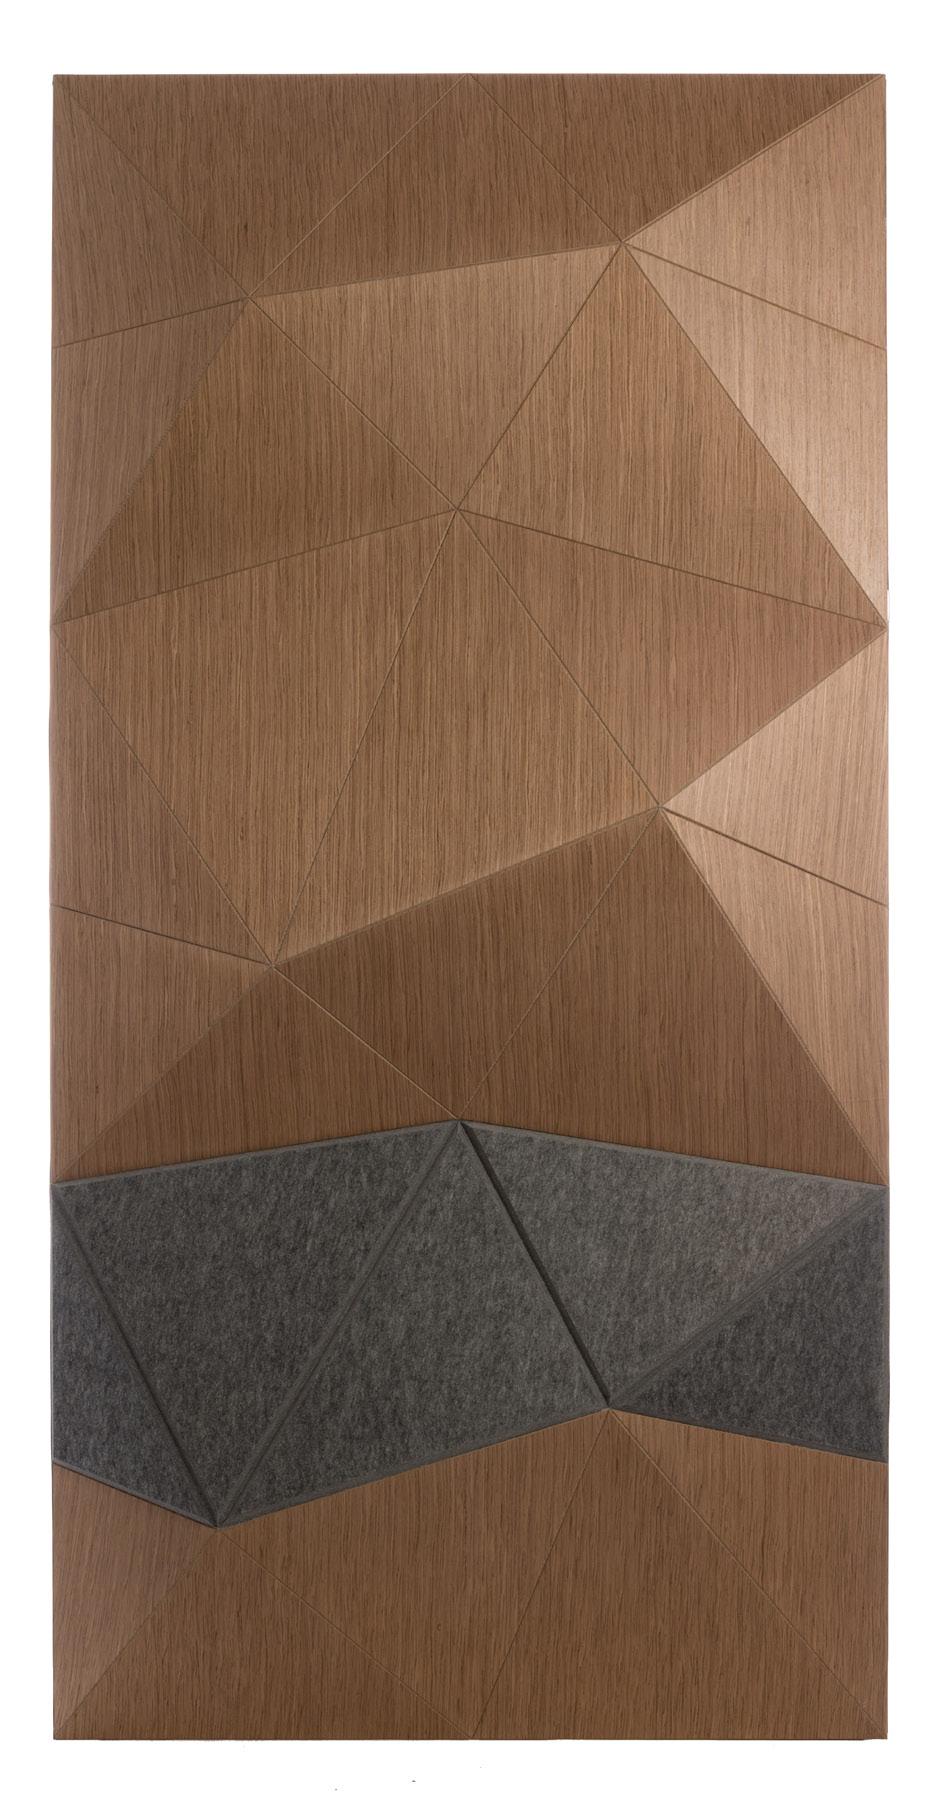 Fold Panels are 3D panels with engaging geometries, built inside a